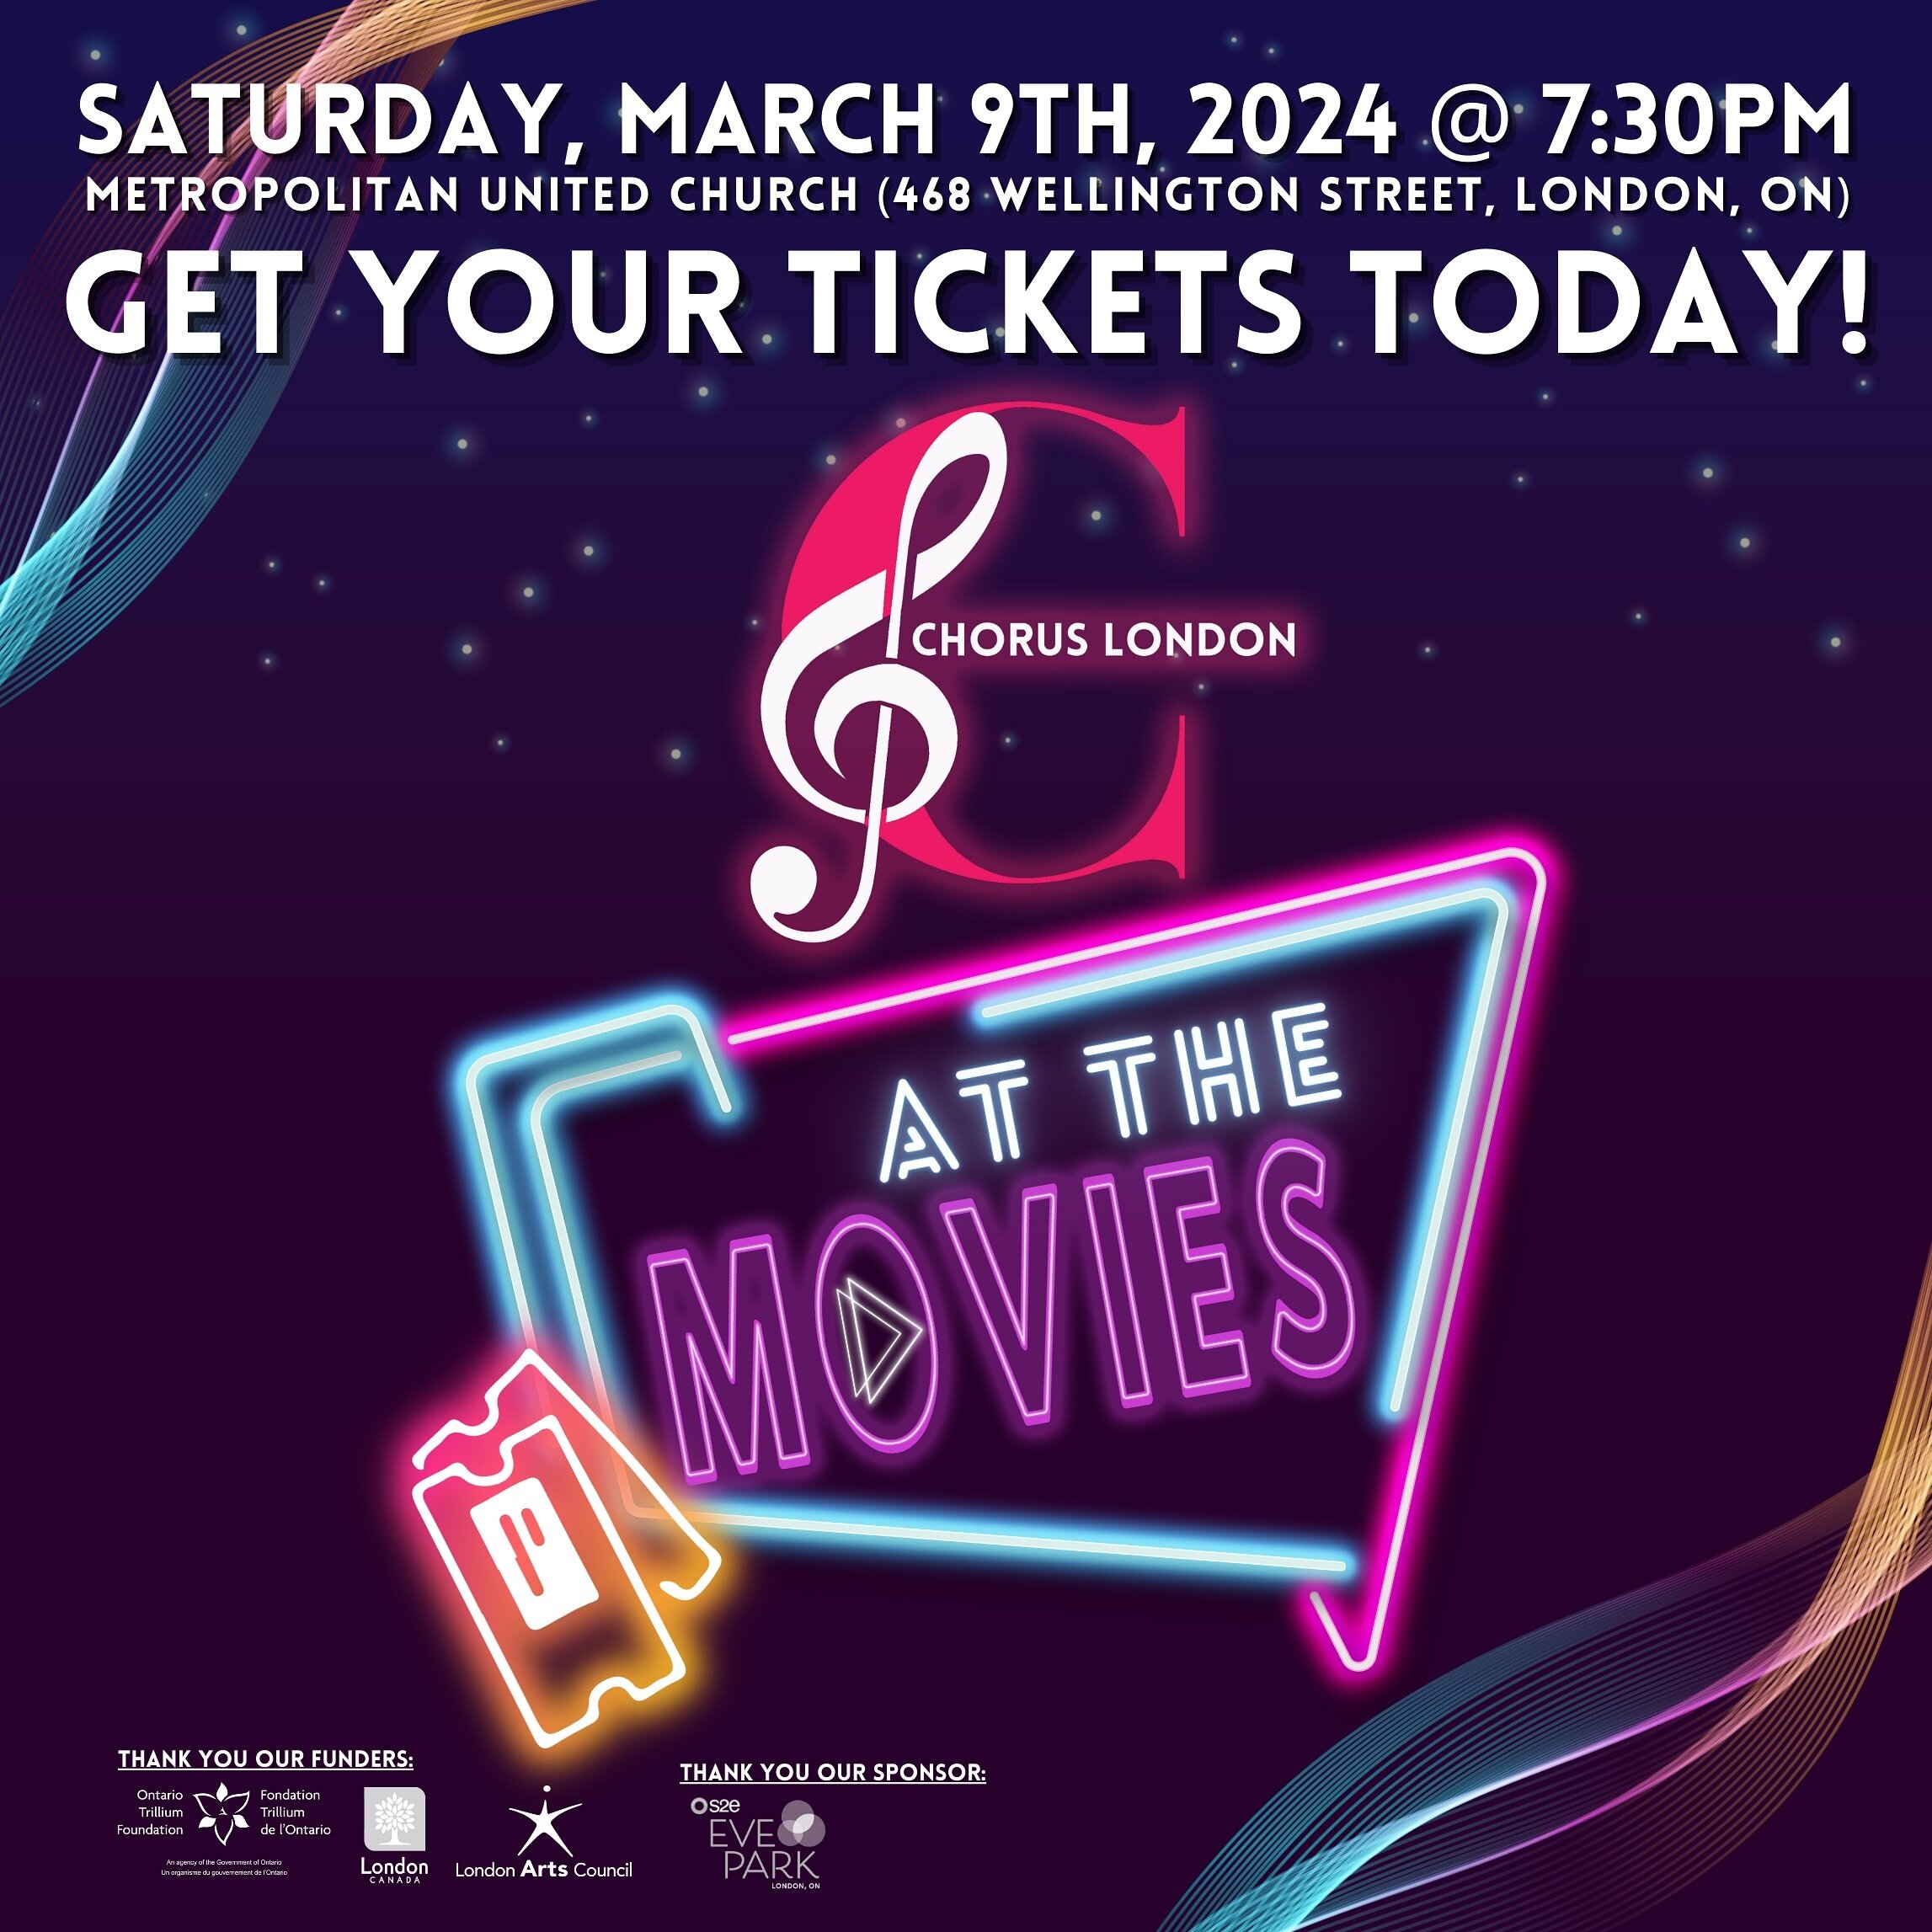 Get your tickets today!
Join us on Saturday, March 9th, for Chorus London at the Movies.

Ticket are $25 online (https://www.choruslondon.com/tickets)
Doors open at 7:00PM
Metropolitan United Church (468 Wellington Street, London, ON)

Conducted by D